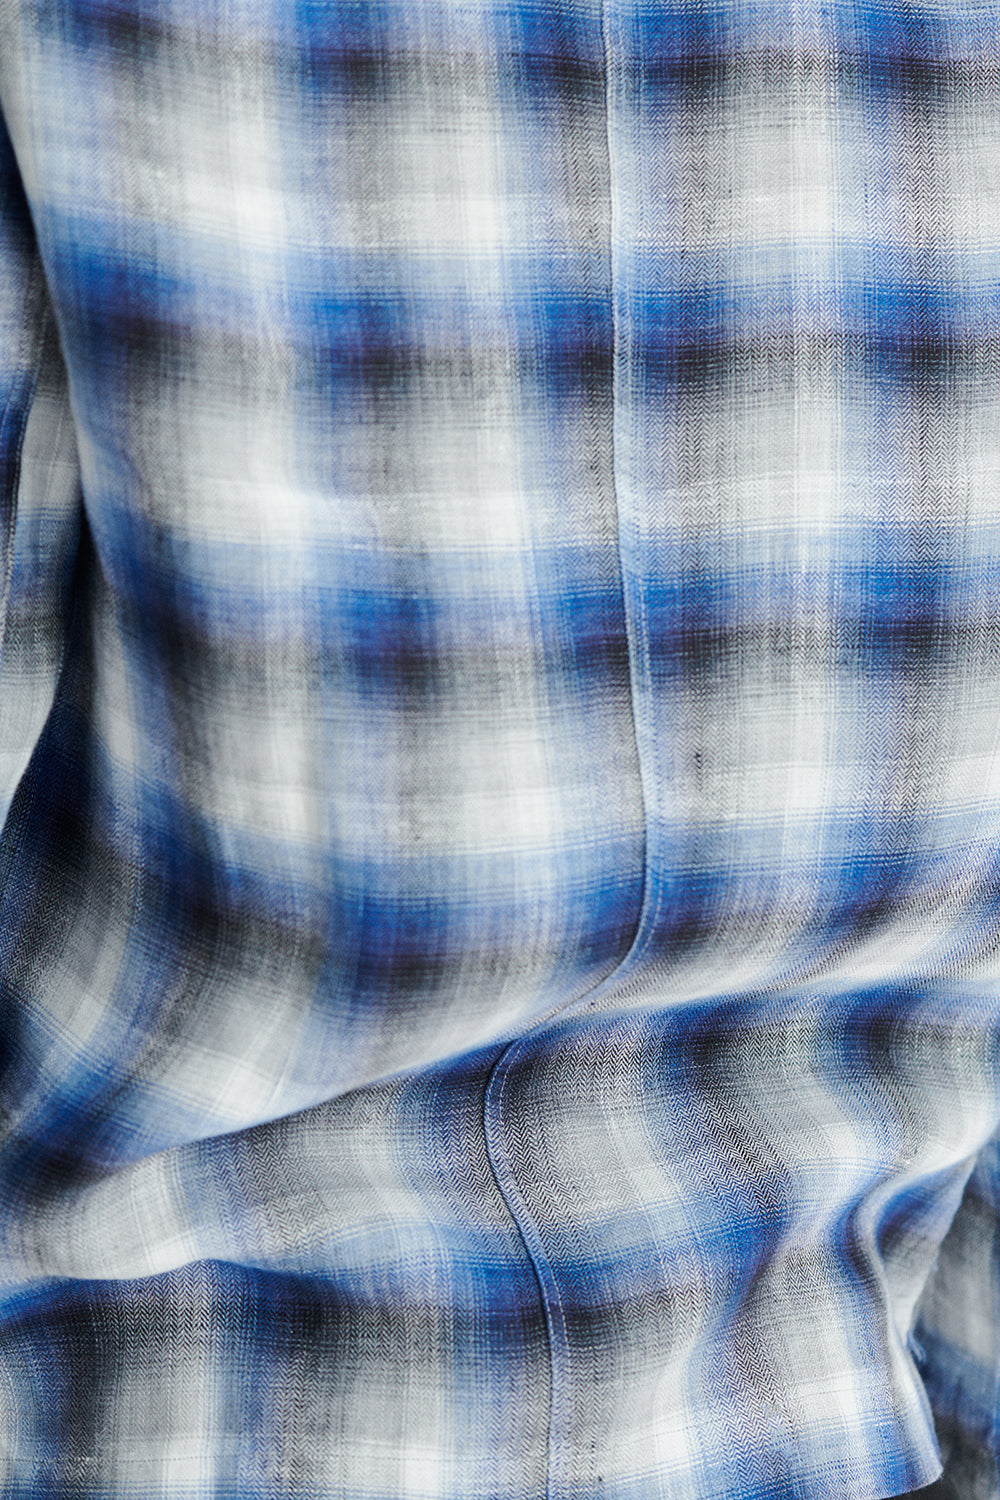 Daily Jacket in a Tonal Blue, Grey and White Chequered Fine Italian Linen by Albini